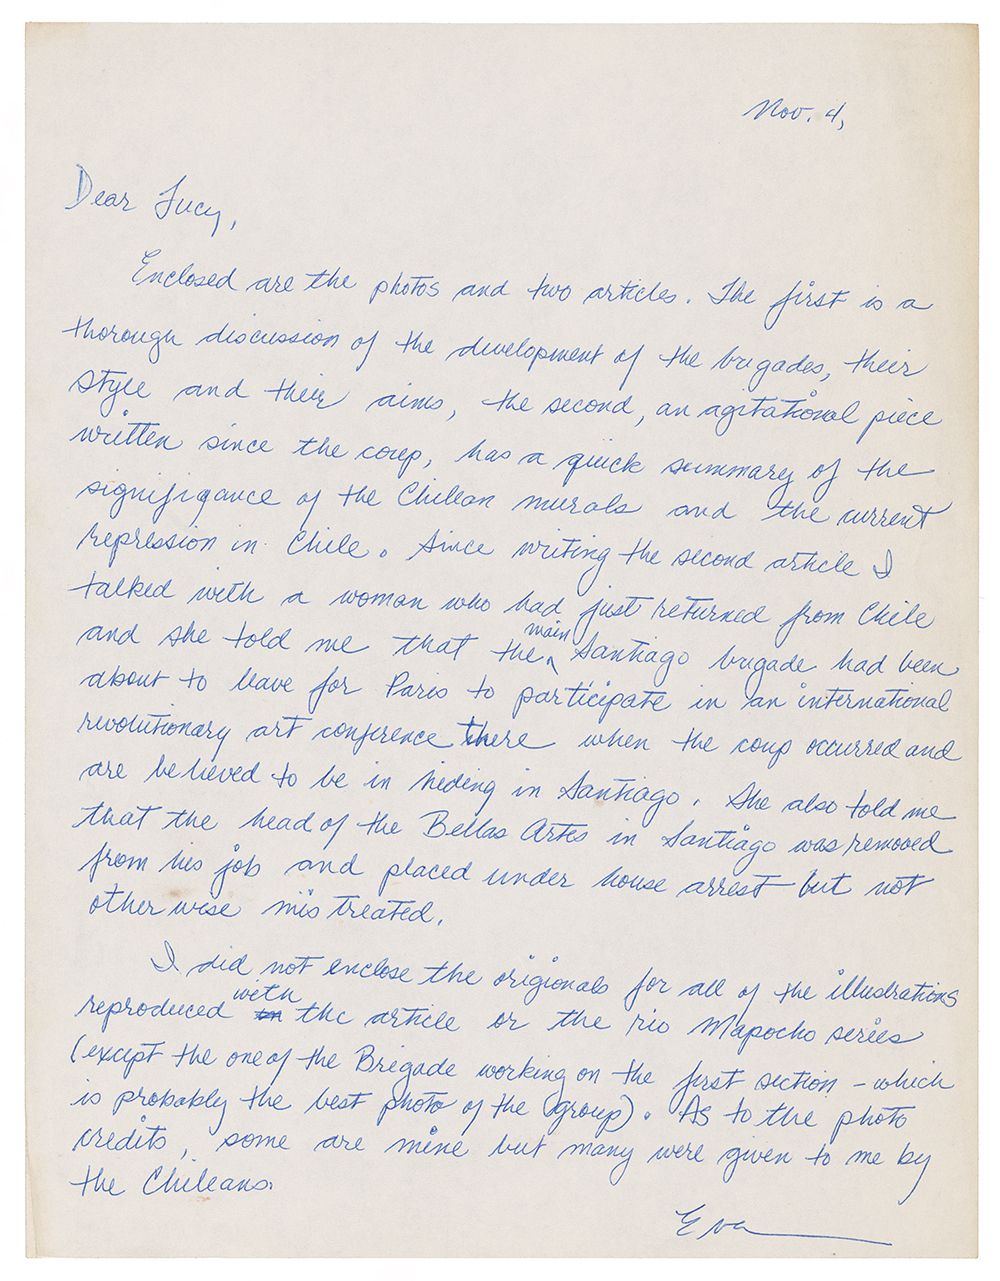 Letter written to Lucy Lippard by Eva Cockcroft, November 4, 1973